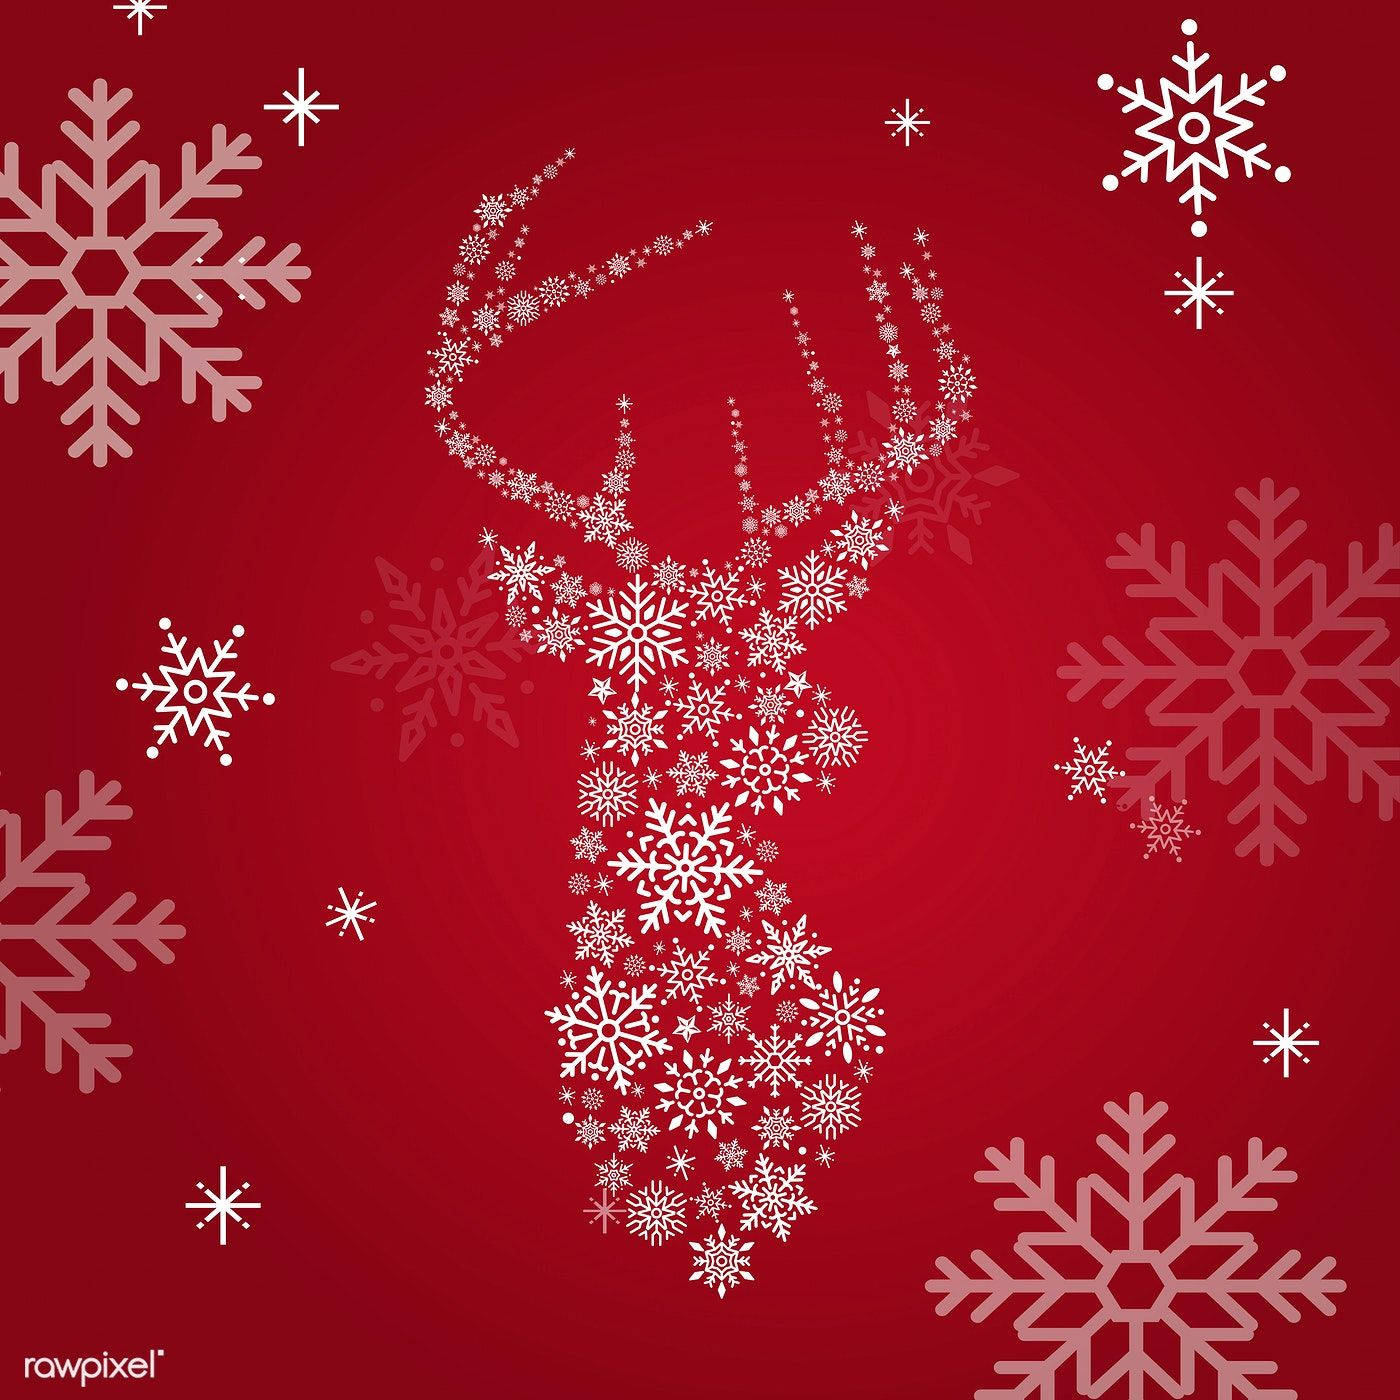 Fanart Snowflakes Red Christmas Background Wallpaper